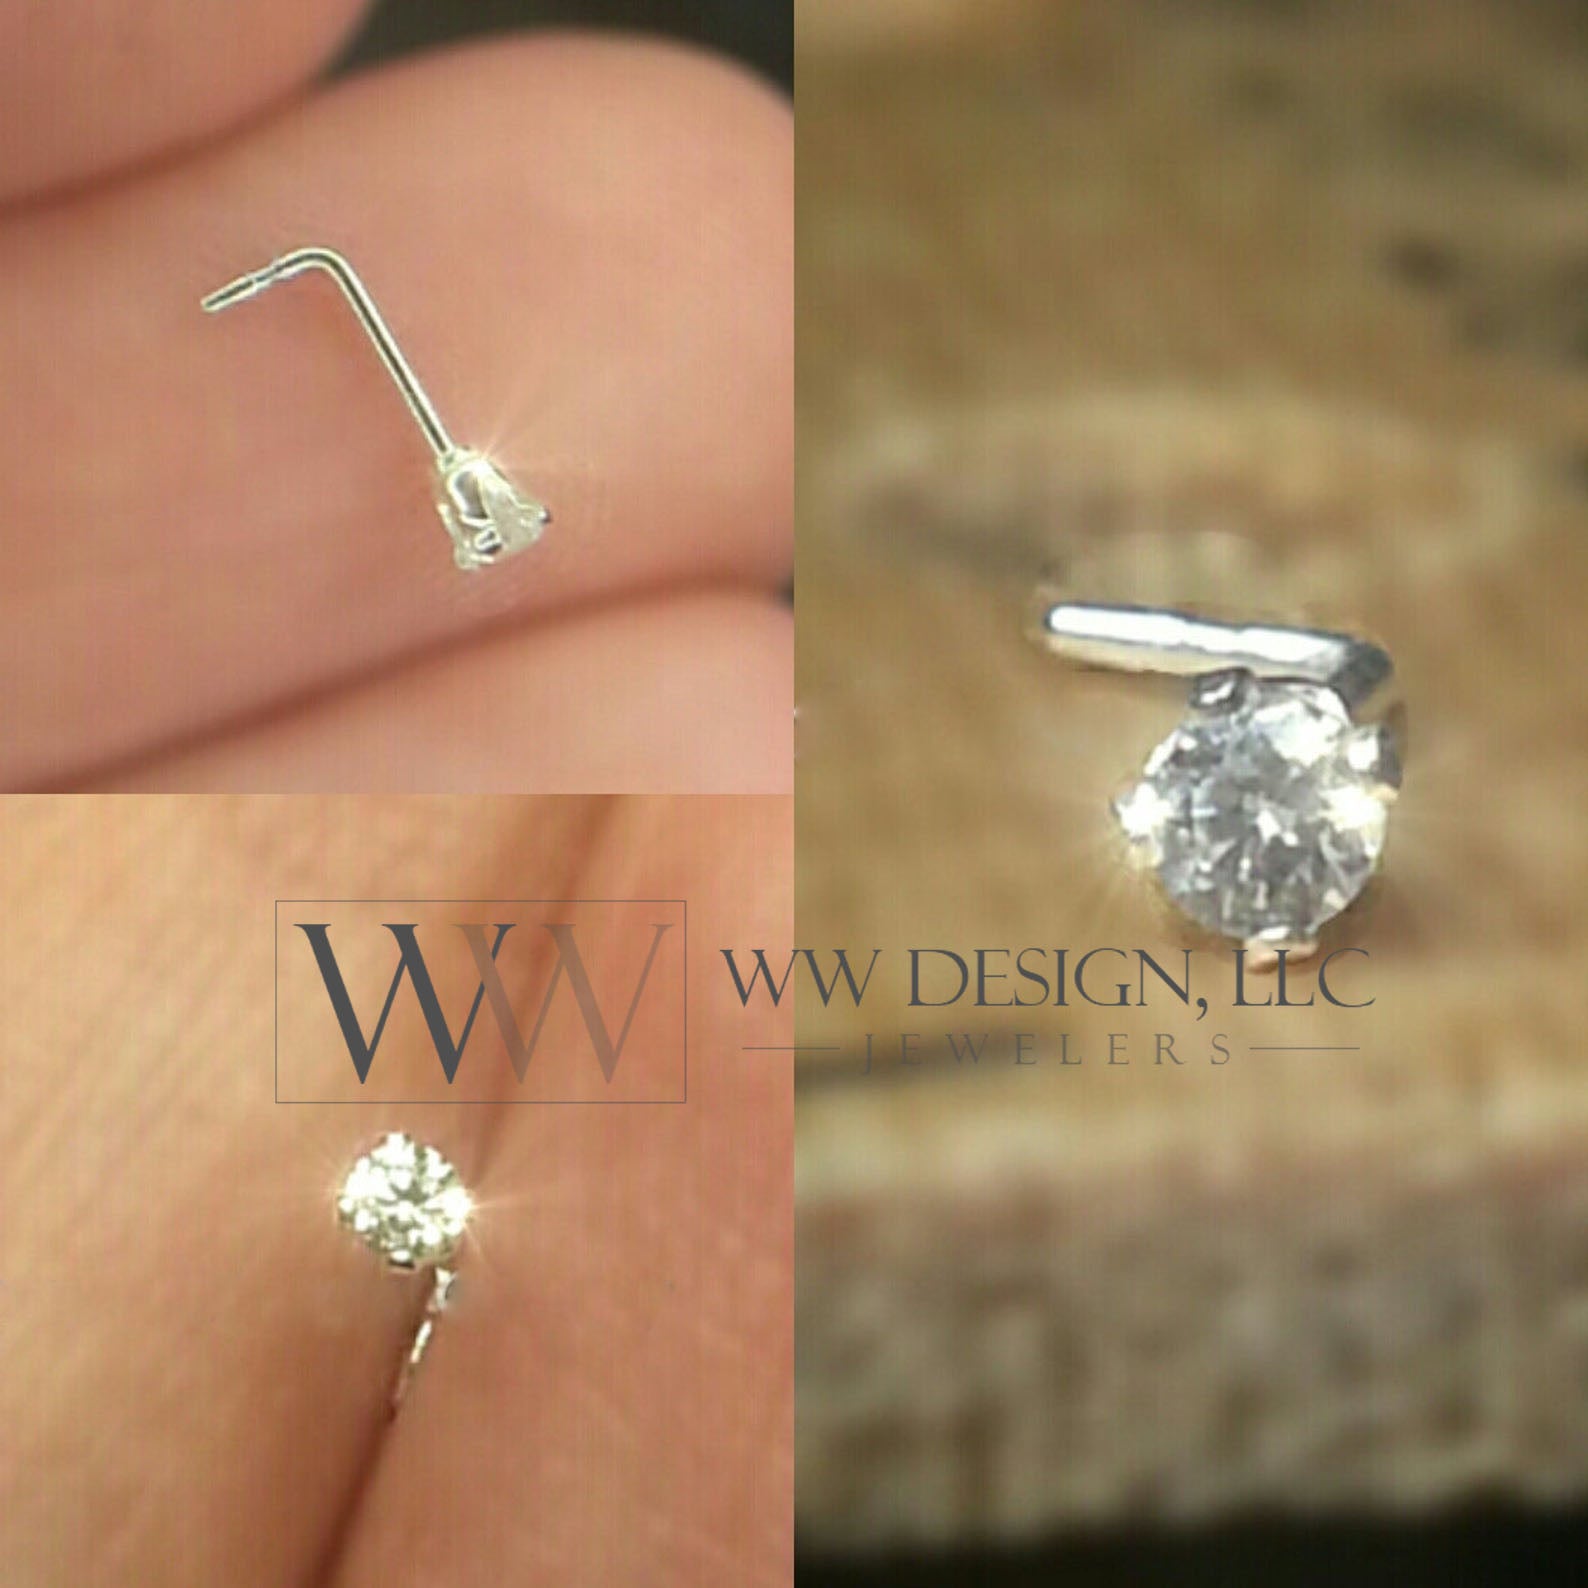 SWAROVSKI 2mm Crystal in a Tragus Cartilage Helix Stud Post Sterling Silver / 14k Yellow or White Gold Filled / Solid L-Post Sparkly CZ Nose